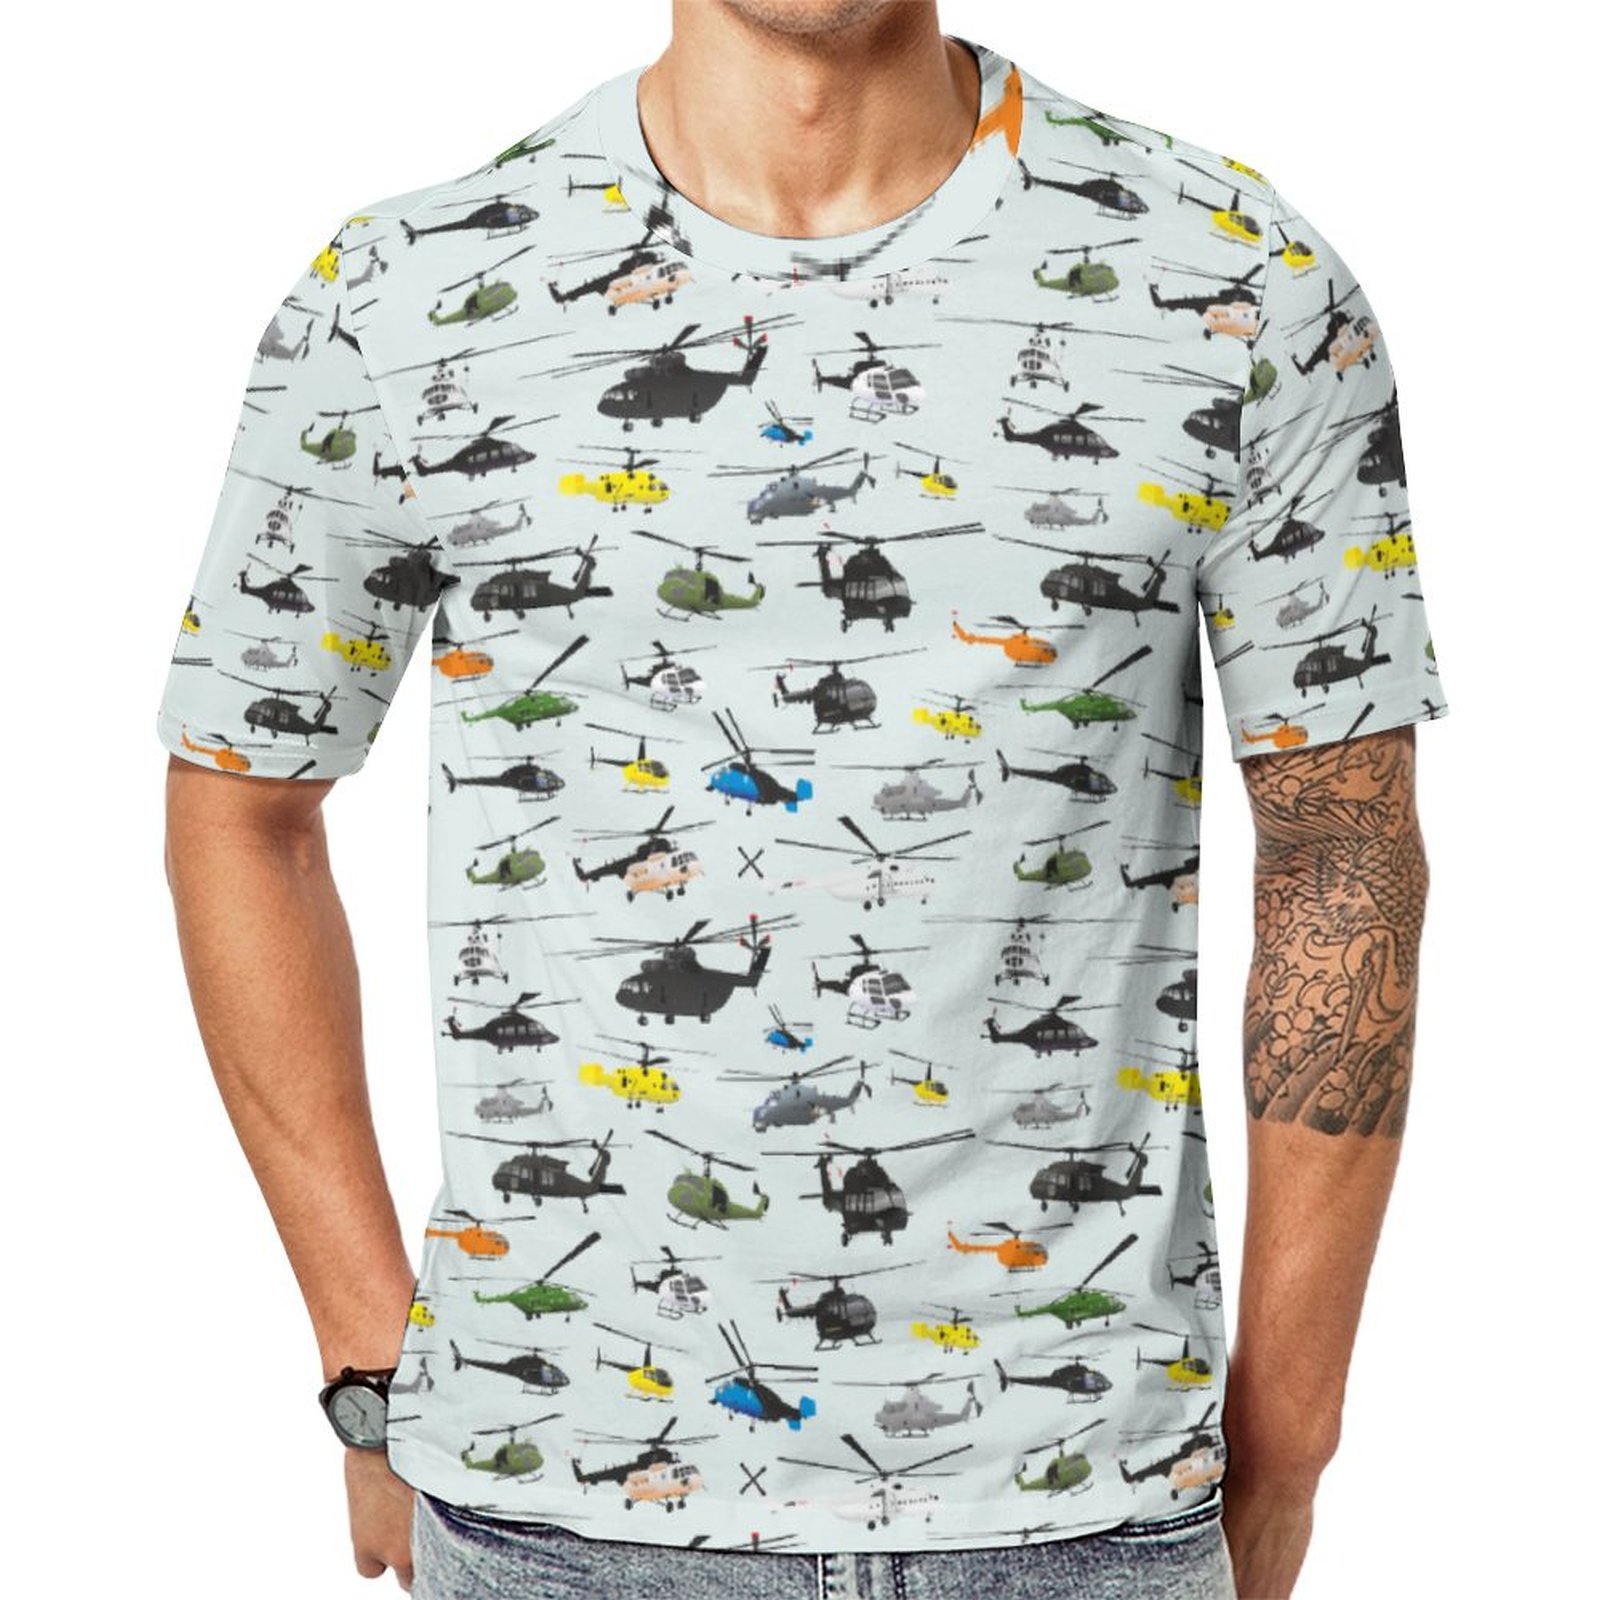 Helicopter Aviation Short Sleeve Print Unisex Tshirt Summer Casual Tees for Men and Women Coolcoshirts